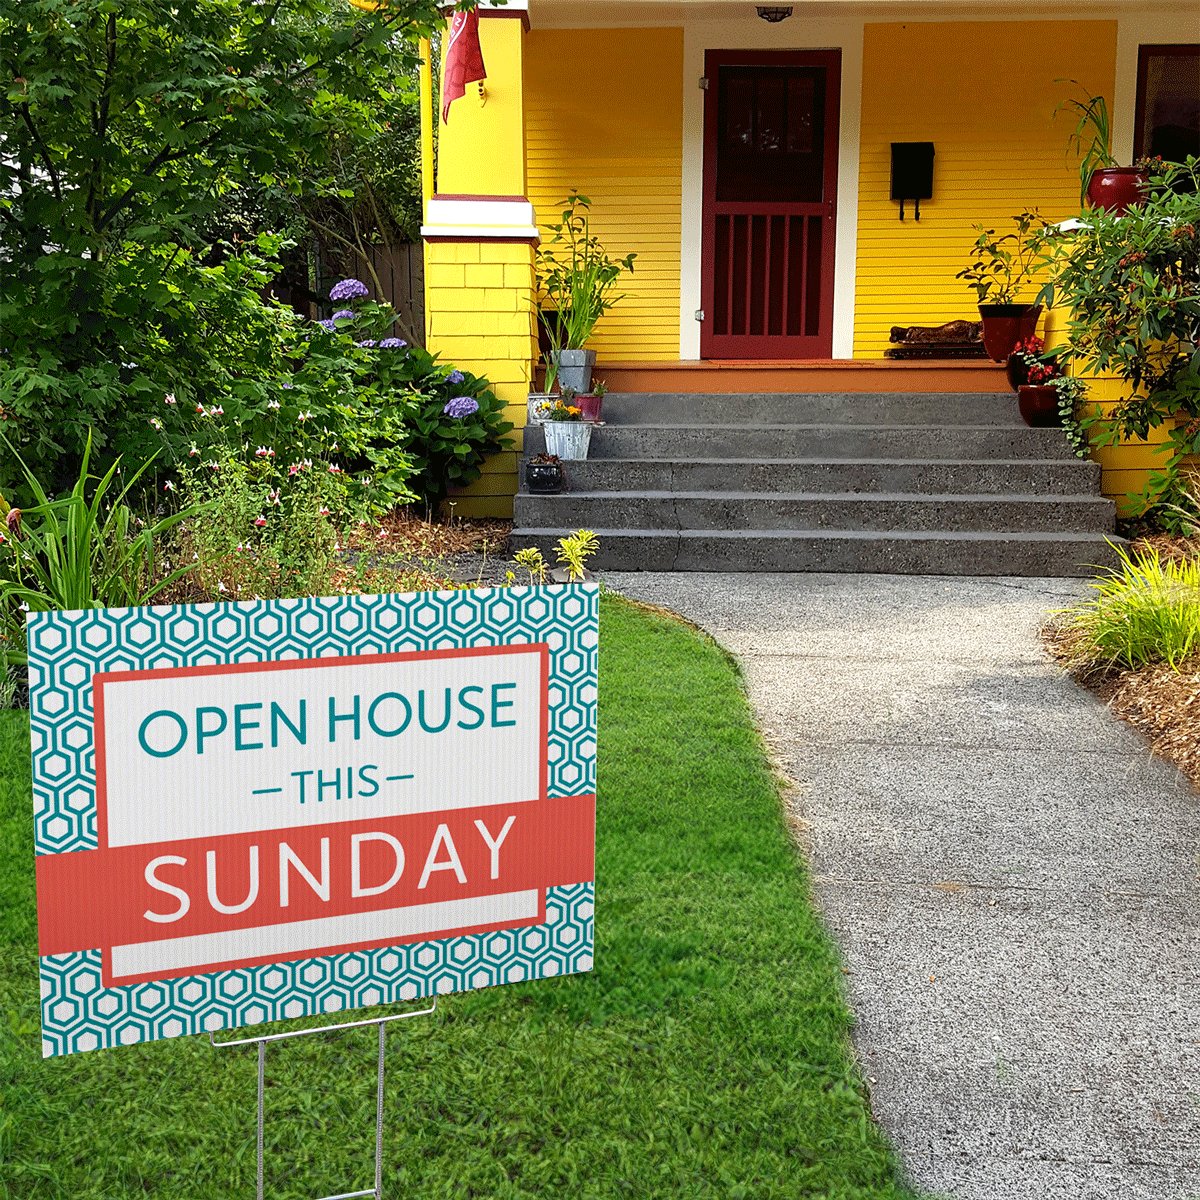 Dwell Open House - Yard Sign - All Things Real Estate